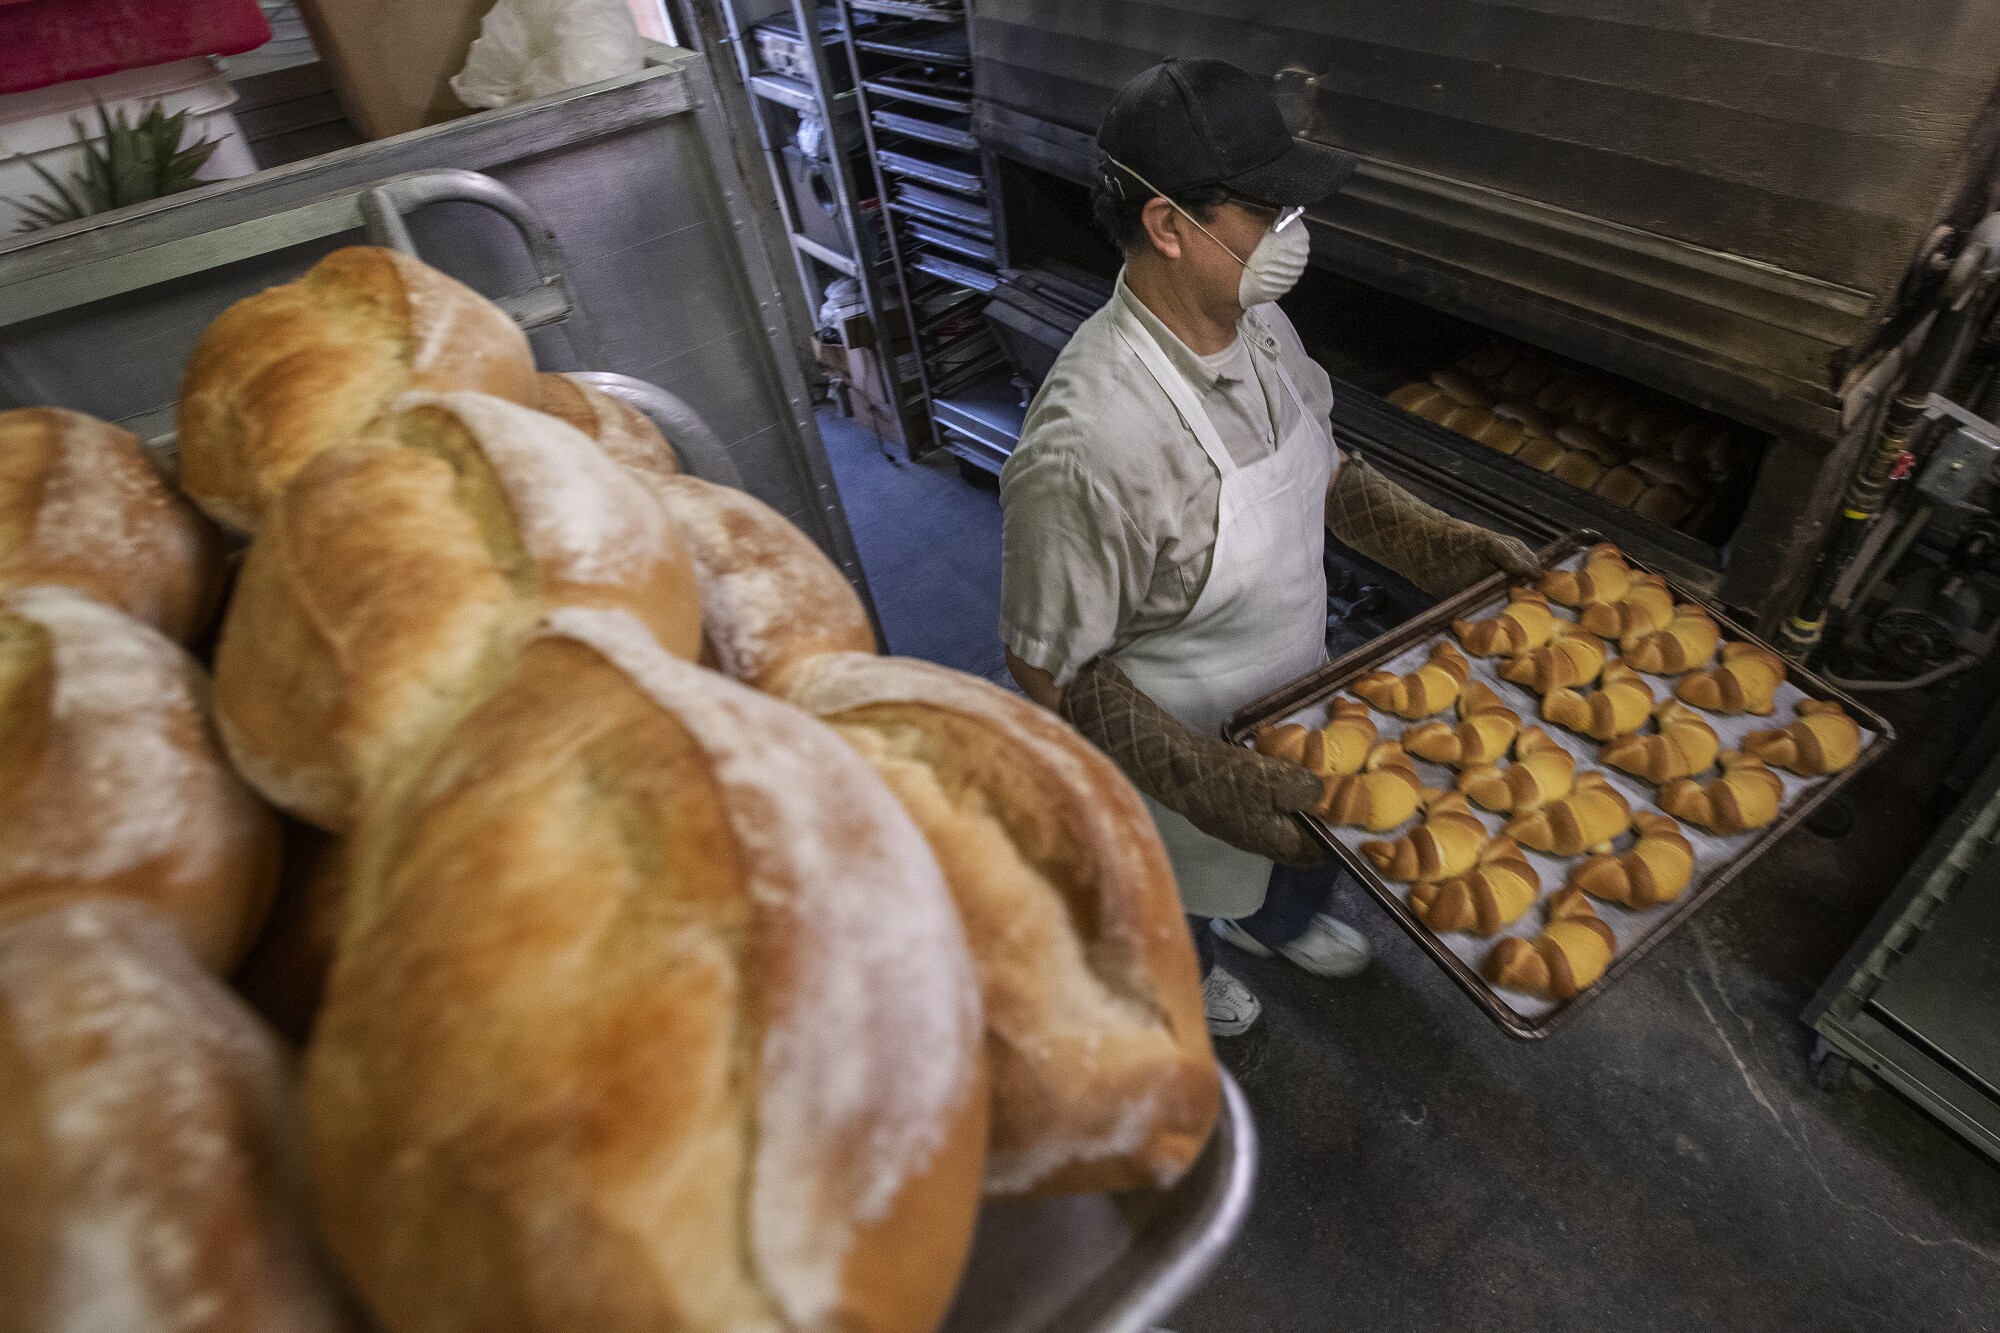  Miguel Dominguez, owner of Marisol Bakery on Whittier Blvd., carries a tray of breads